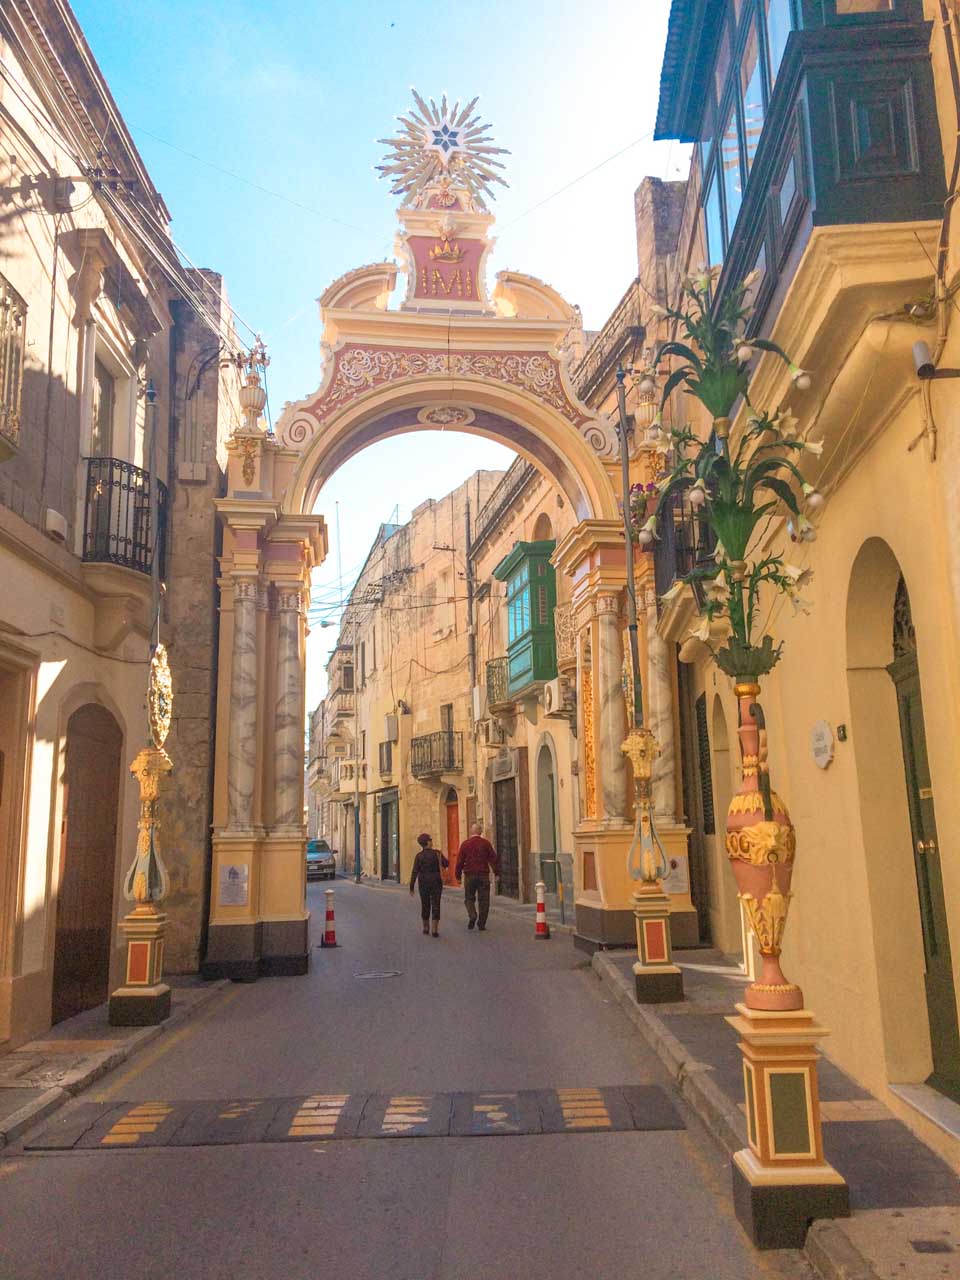 A street decorated for the Feast of St. Joseph in Rabat, Malta